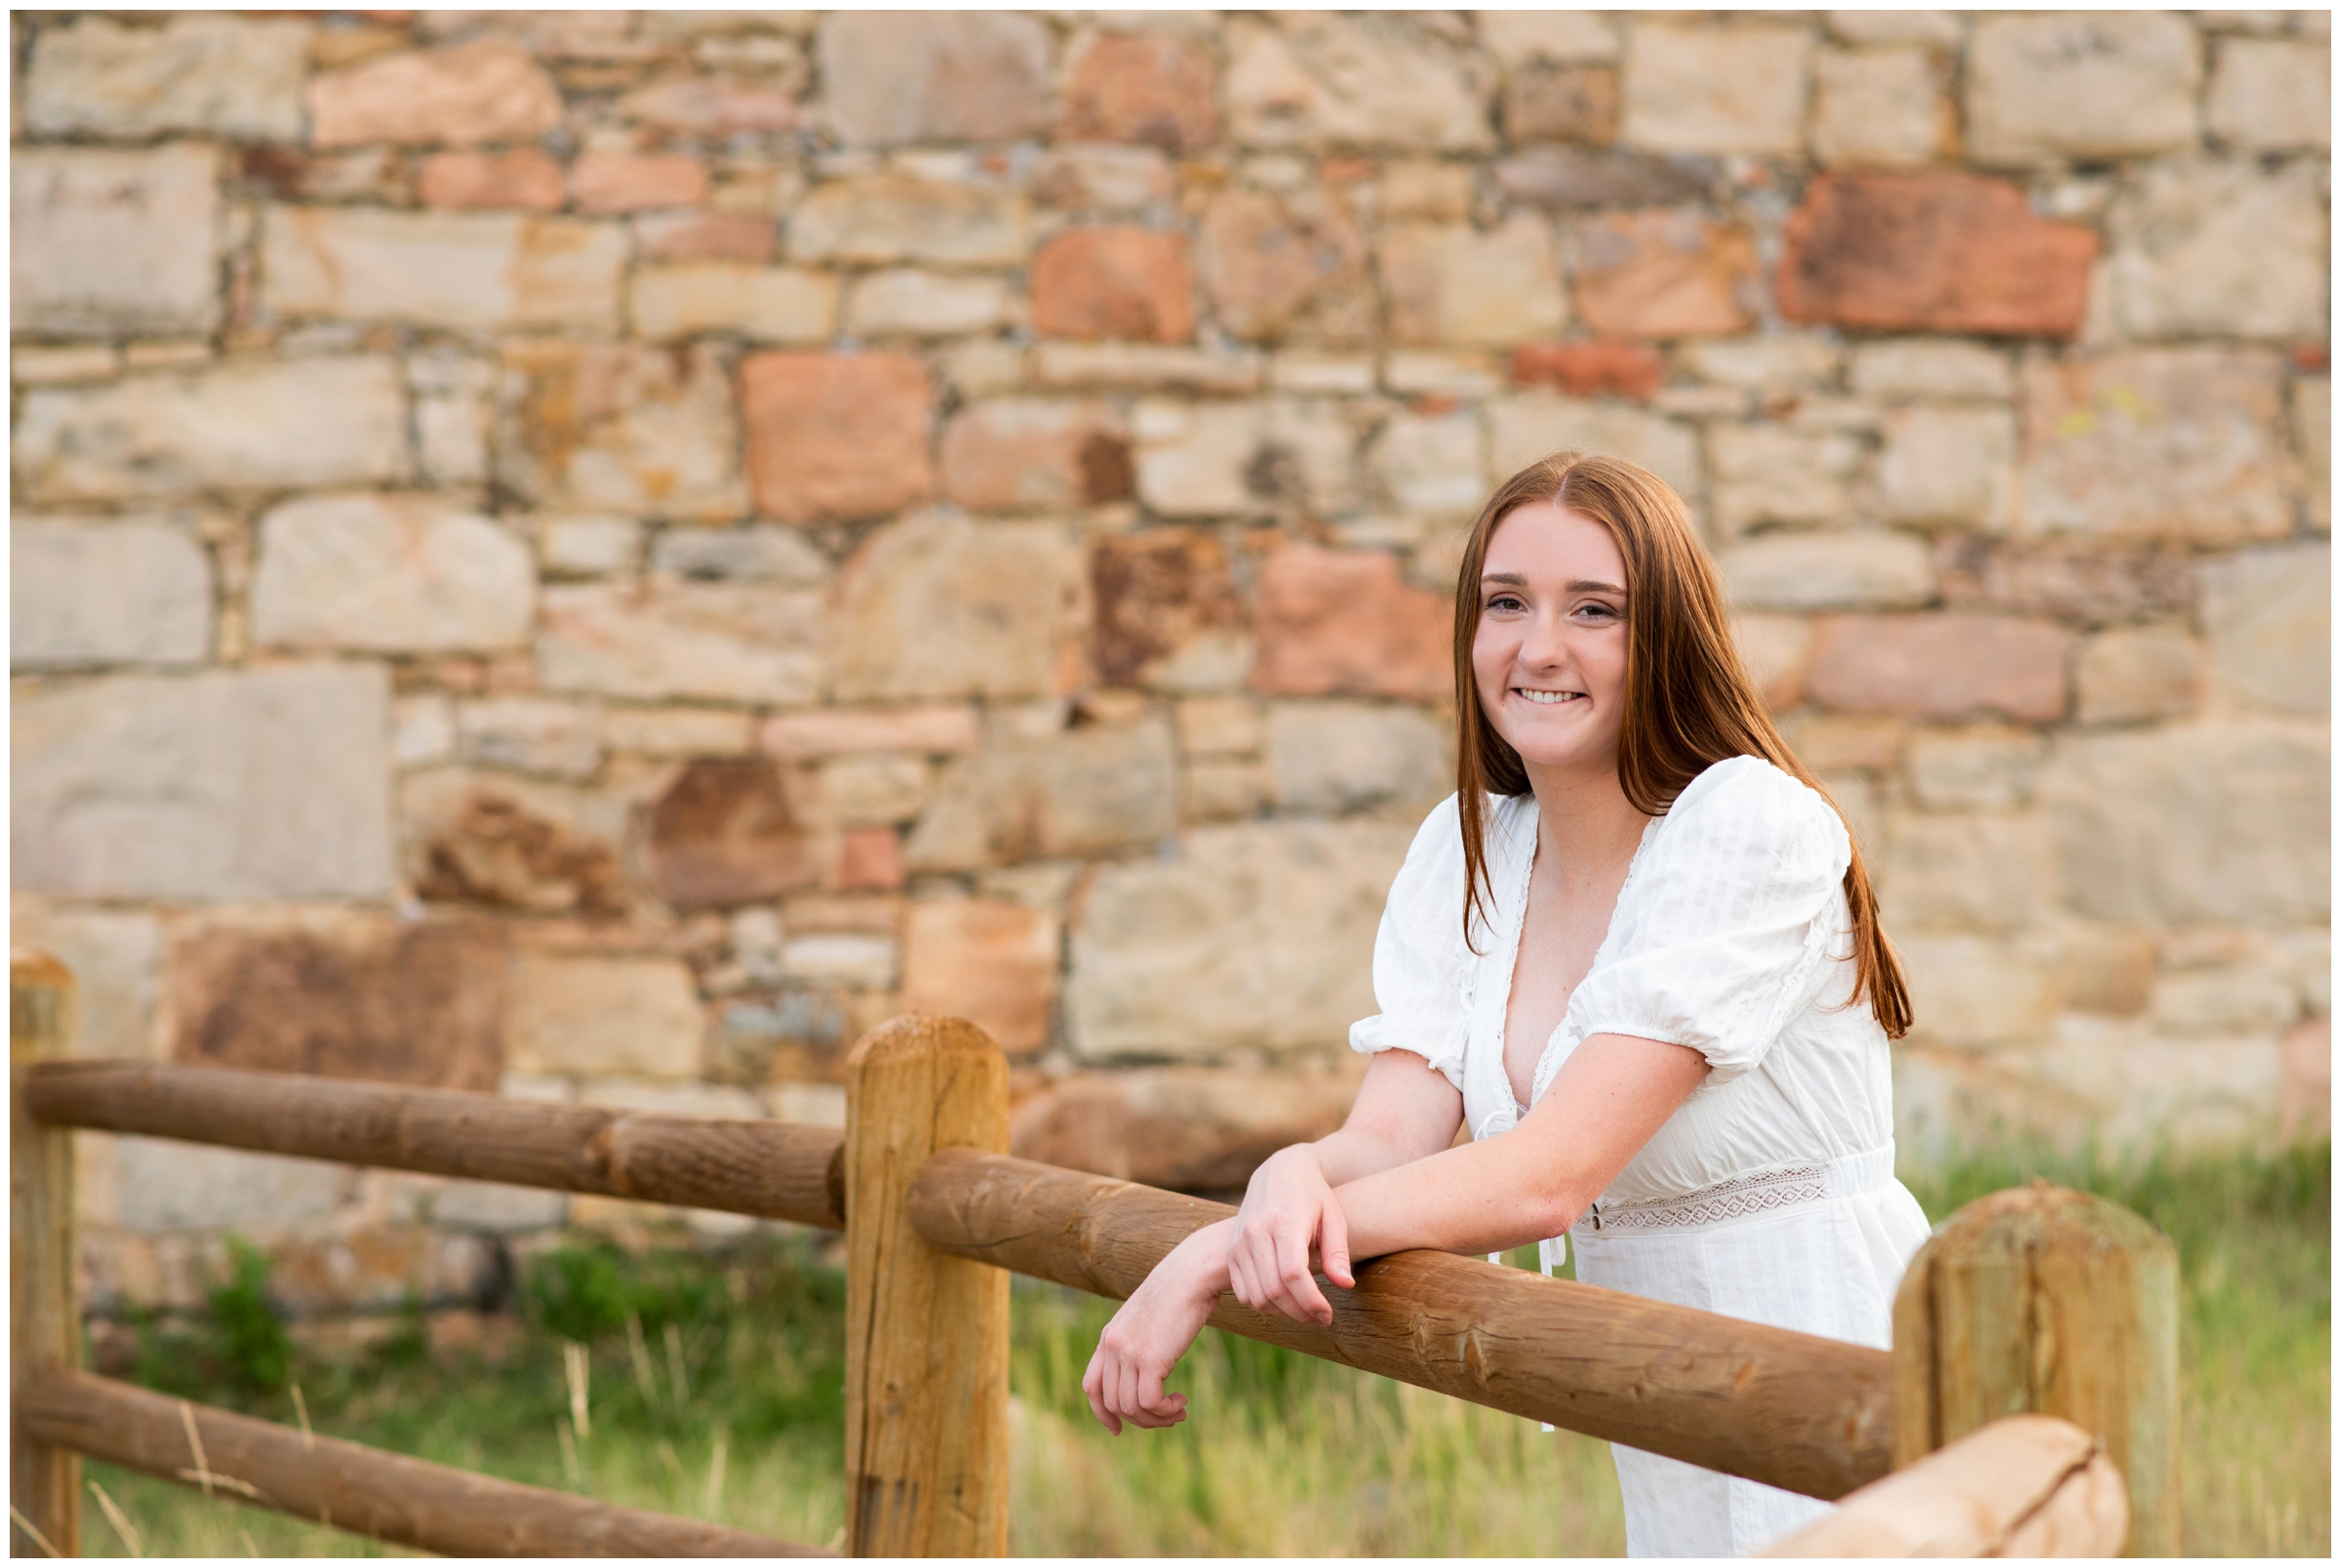 teen leaning on a wooden fence with stone wall in background during Colorado graduation photos 